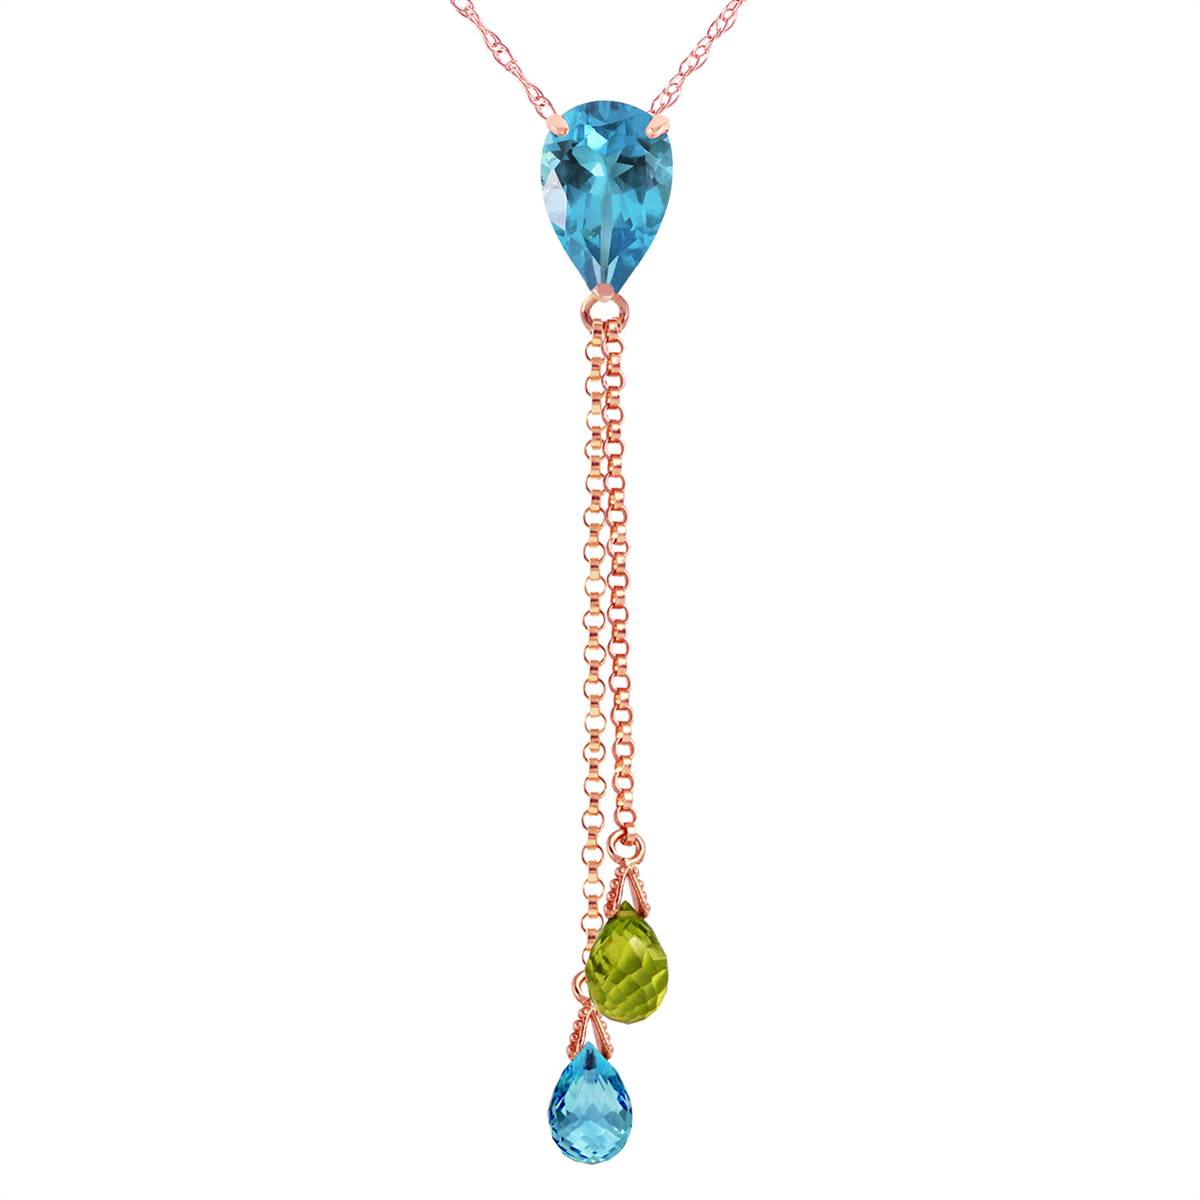 14K Solid Rose Gold Necklace w/ Blue Topaz & Peridot